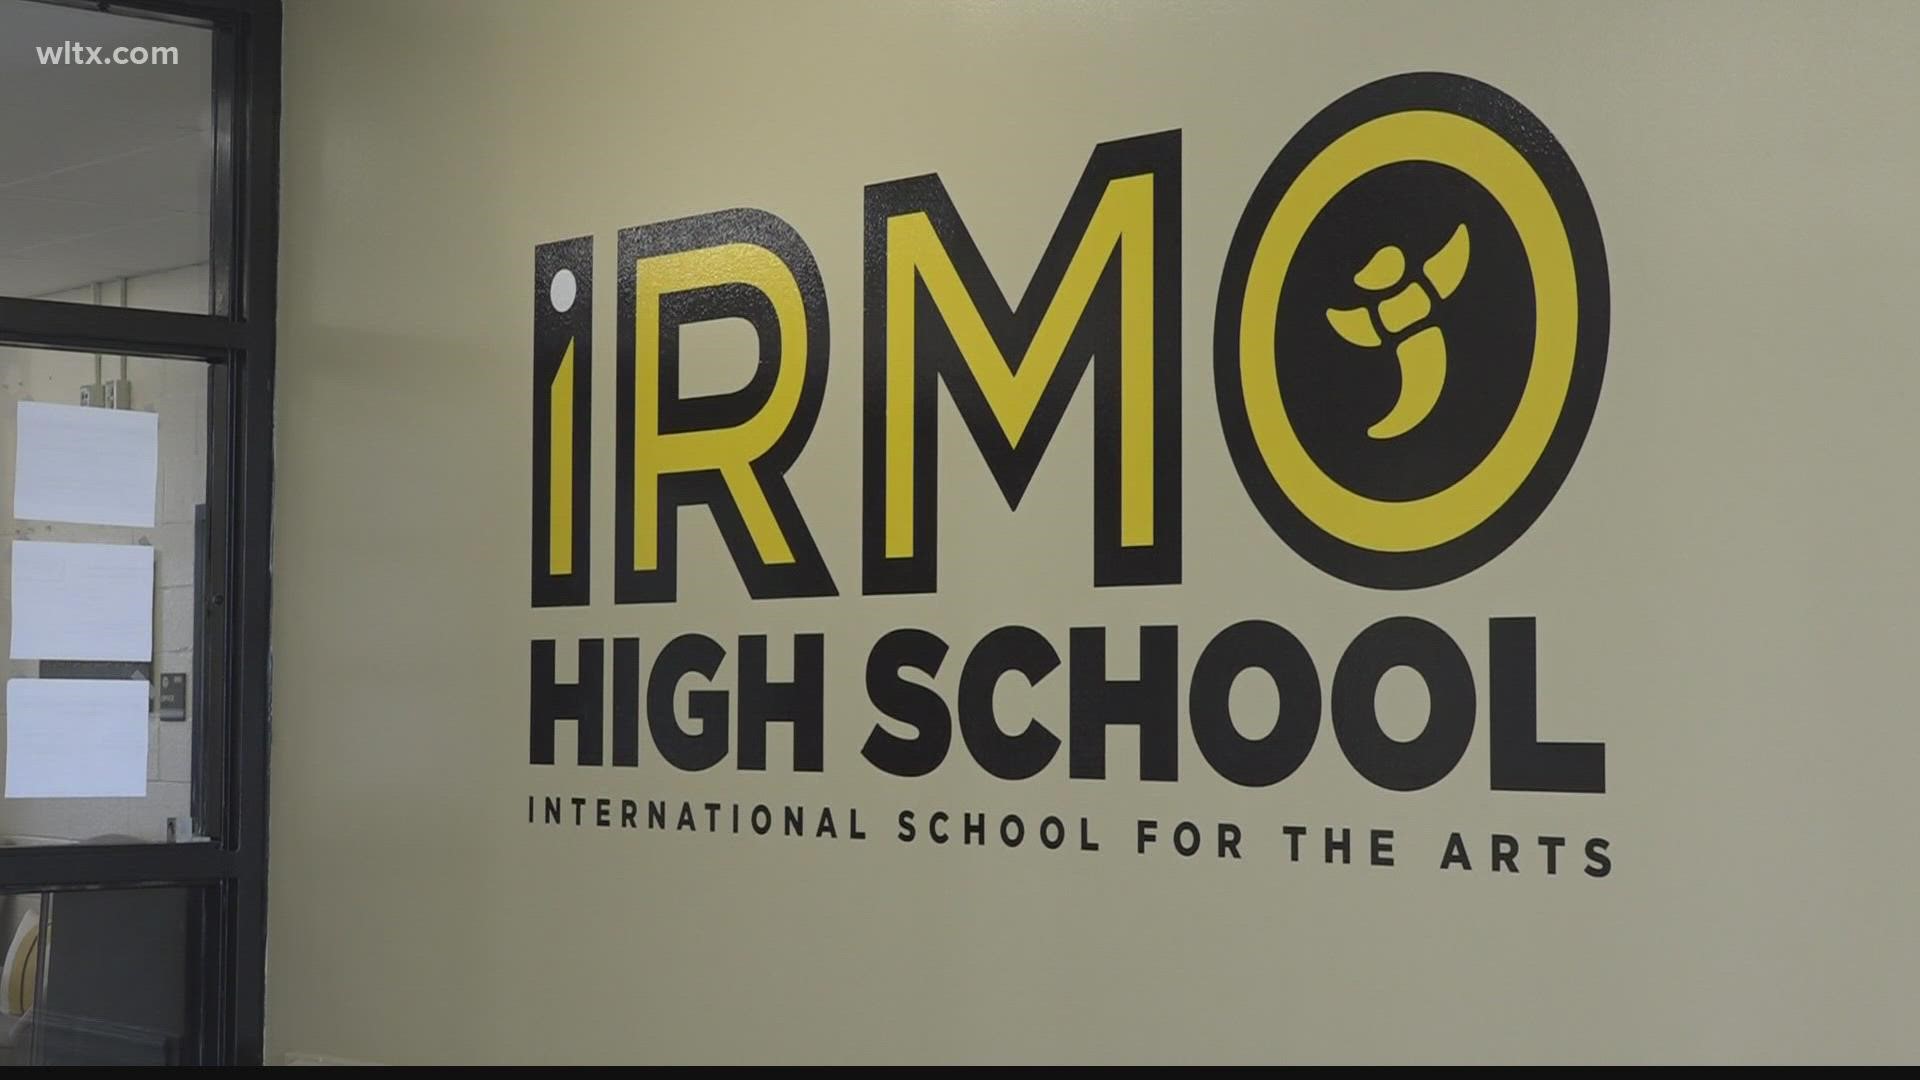 Principal Kaaren Hampton says Irmo high school will have a new look thanks to a hefty $50M dollar sum that's been budgeted by the Lexington-Richland 5 school board.